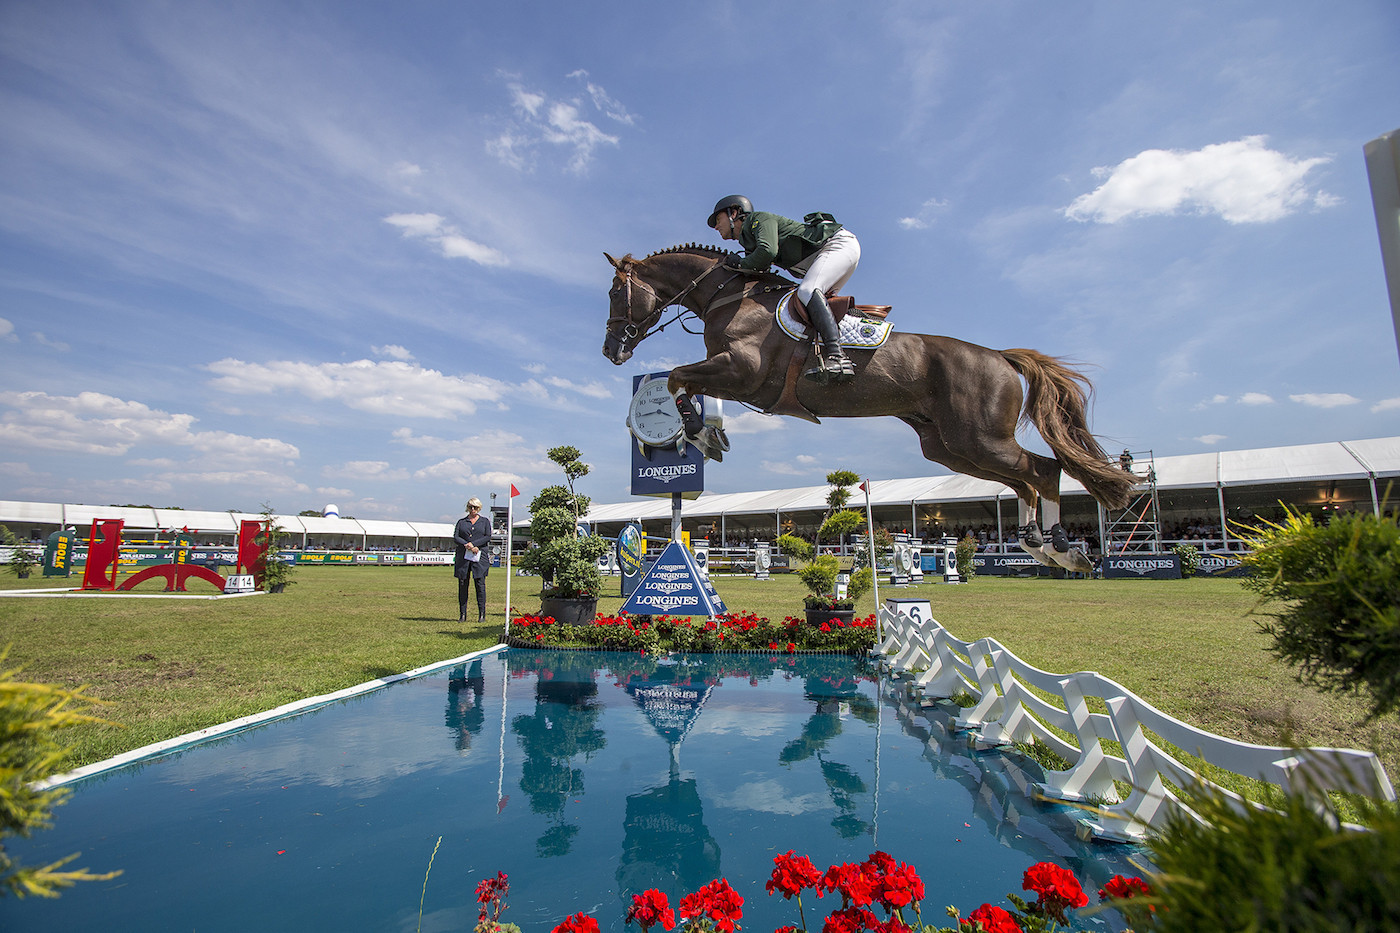 Brazil won the International Equestrian Federation Jumping Nations Cup event in Geesteren ©FEI